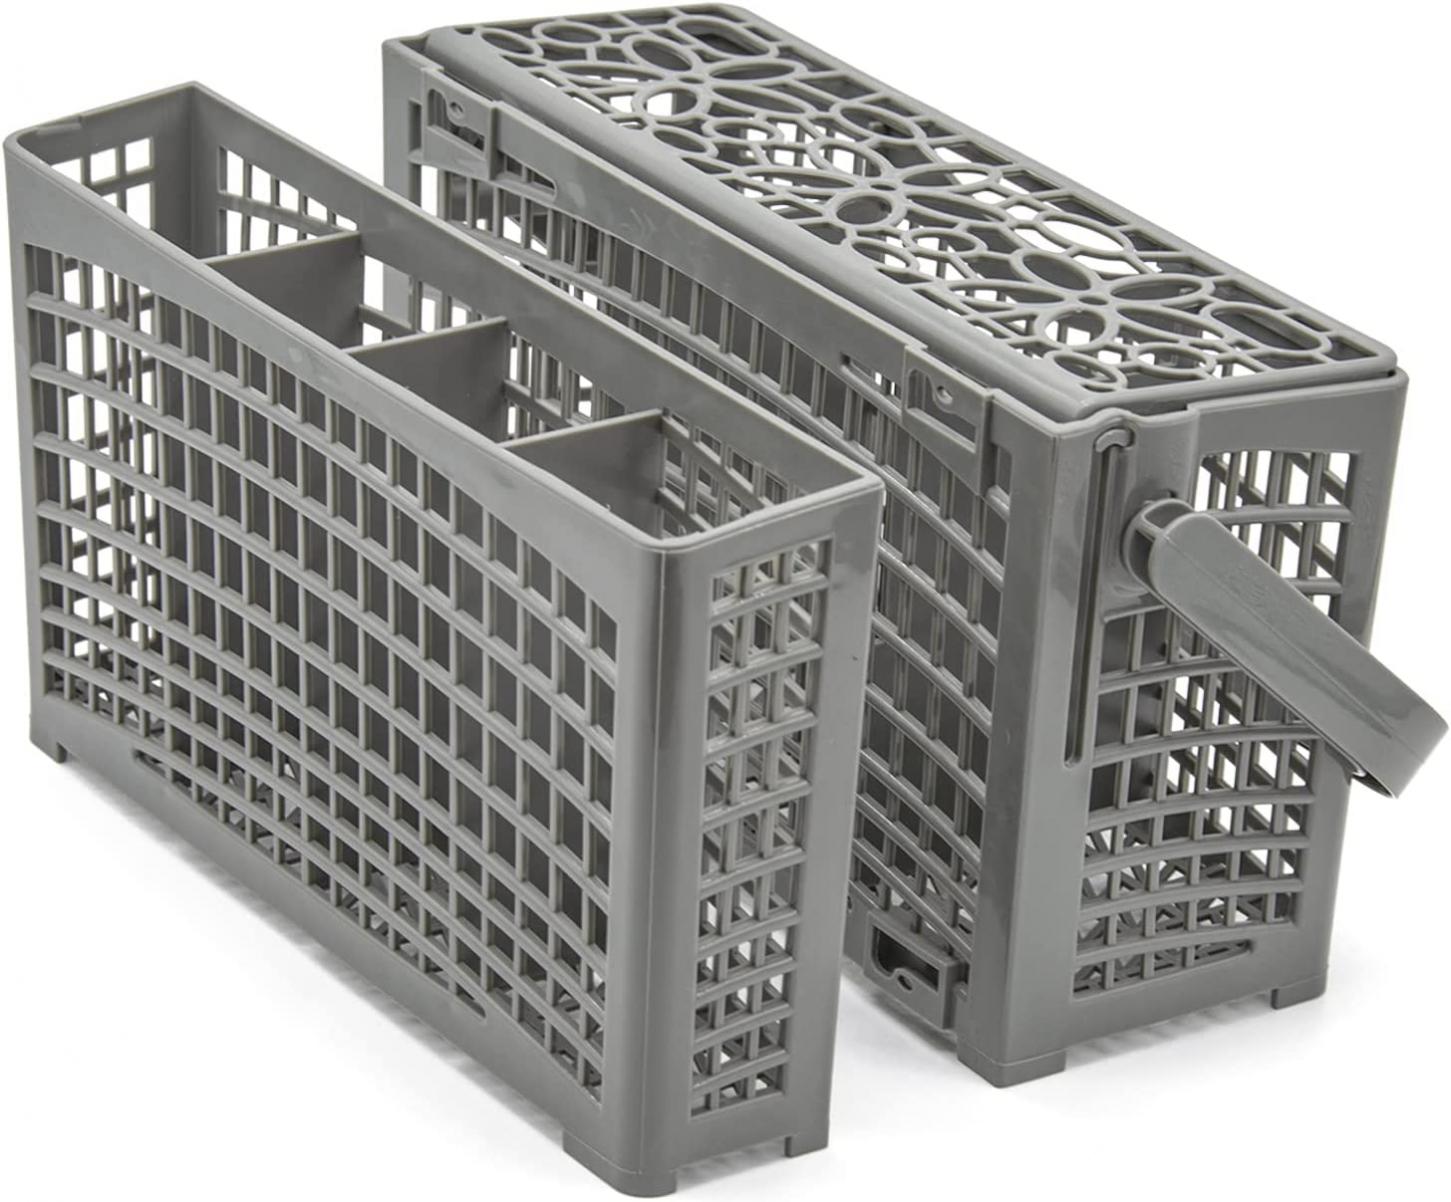 Universal Dishwasher Basket Replacement - 2 in 1 Utensil/Cutlery Basket - Compatible with Bosch, Maytag, Kenmore, Whirlpool, KitchenAid, LG, Samsung, Frigidaire, GE